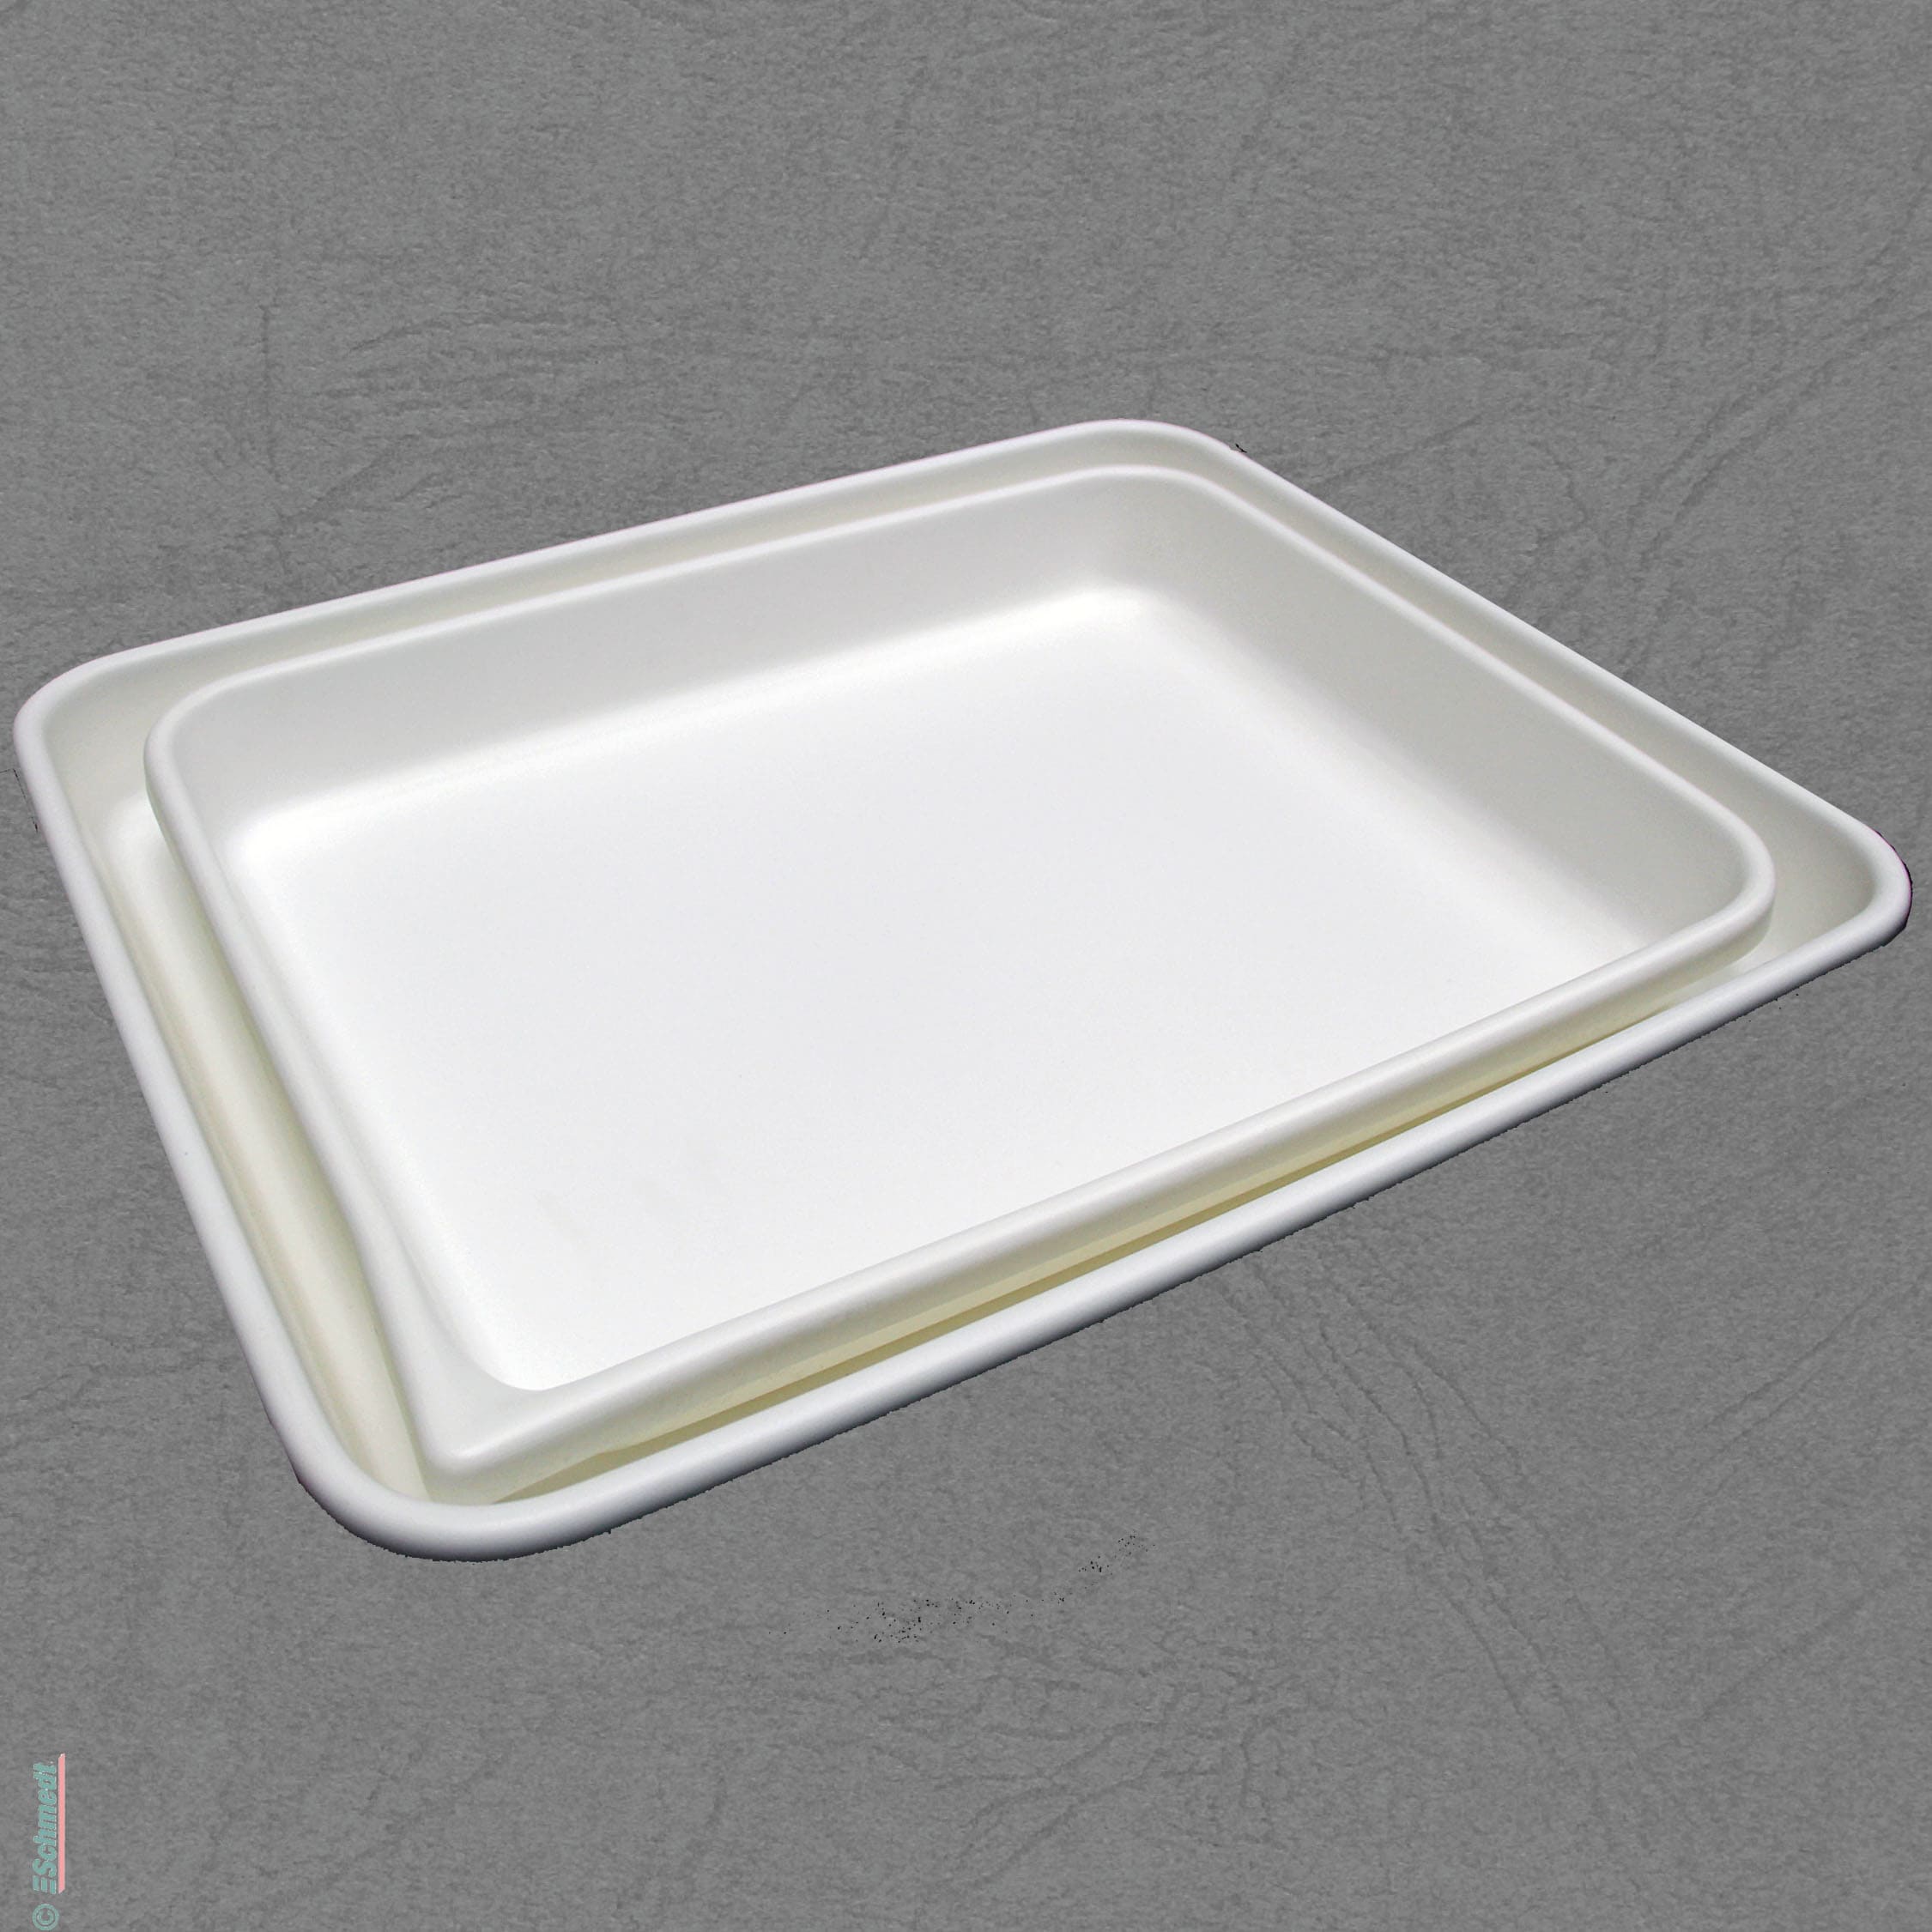 Wash tray, white - made of polyethylene - versatile use, e. g. for bleaching or de-acidification by immersion or for wet cleaning of paper o...